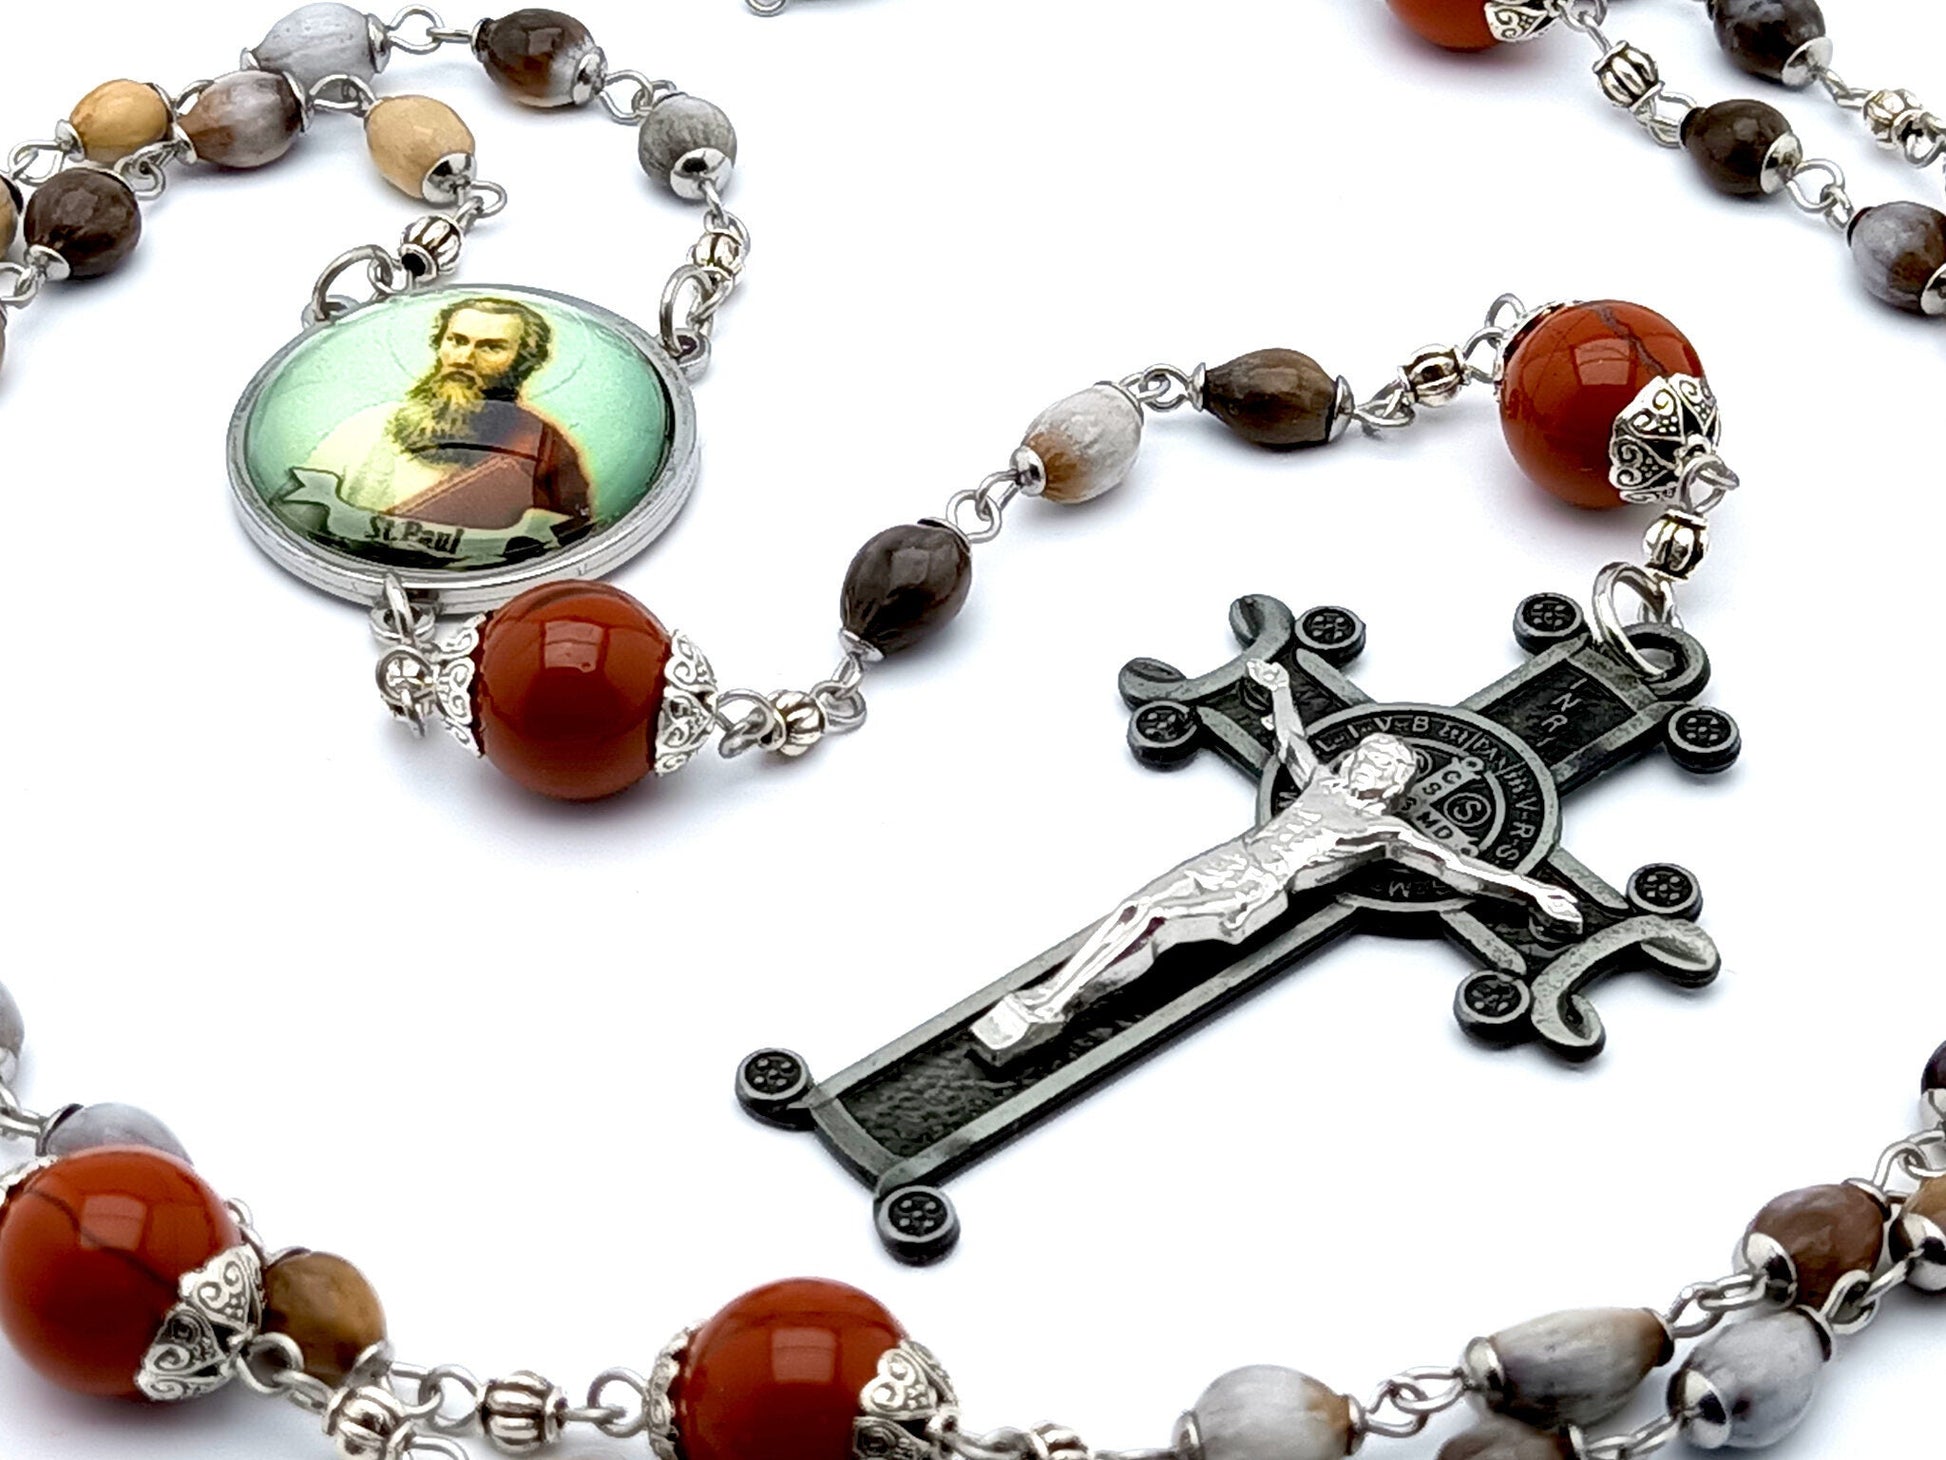 Saint Paul the Apostle unique rosary beads with jobs tears and red gemstone beads, black Saint Benedict crucifix and stainless steel picture centre medal. 